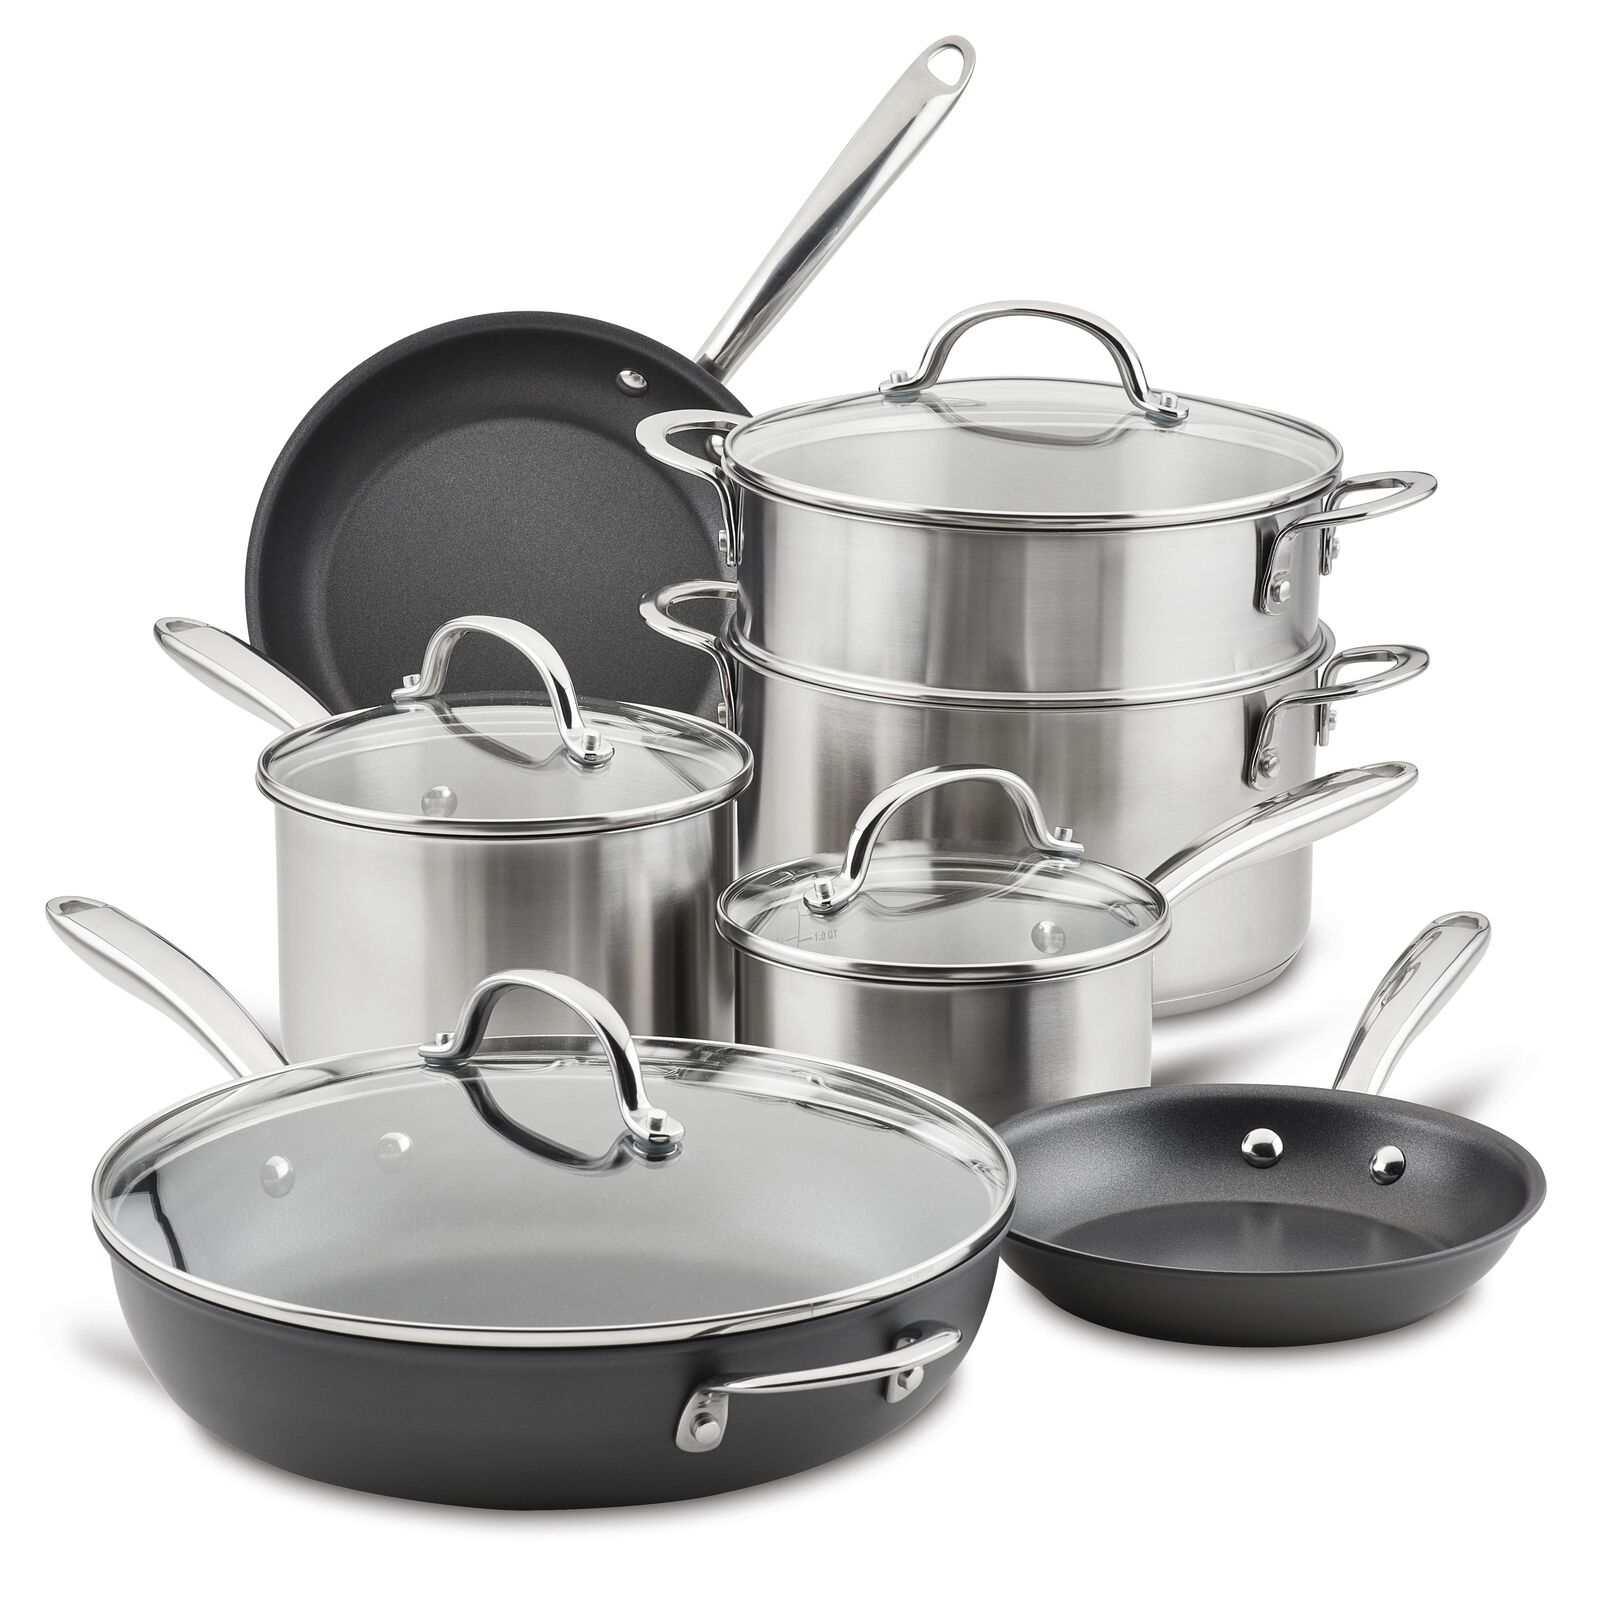 Rachael Ray Professional Stainless Nonstick 11-Piece Cookware Set (Open Box)